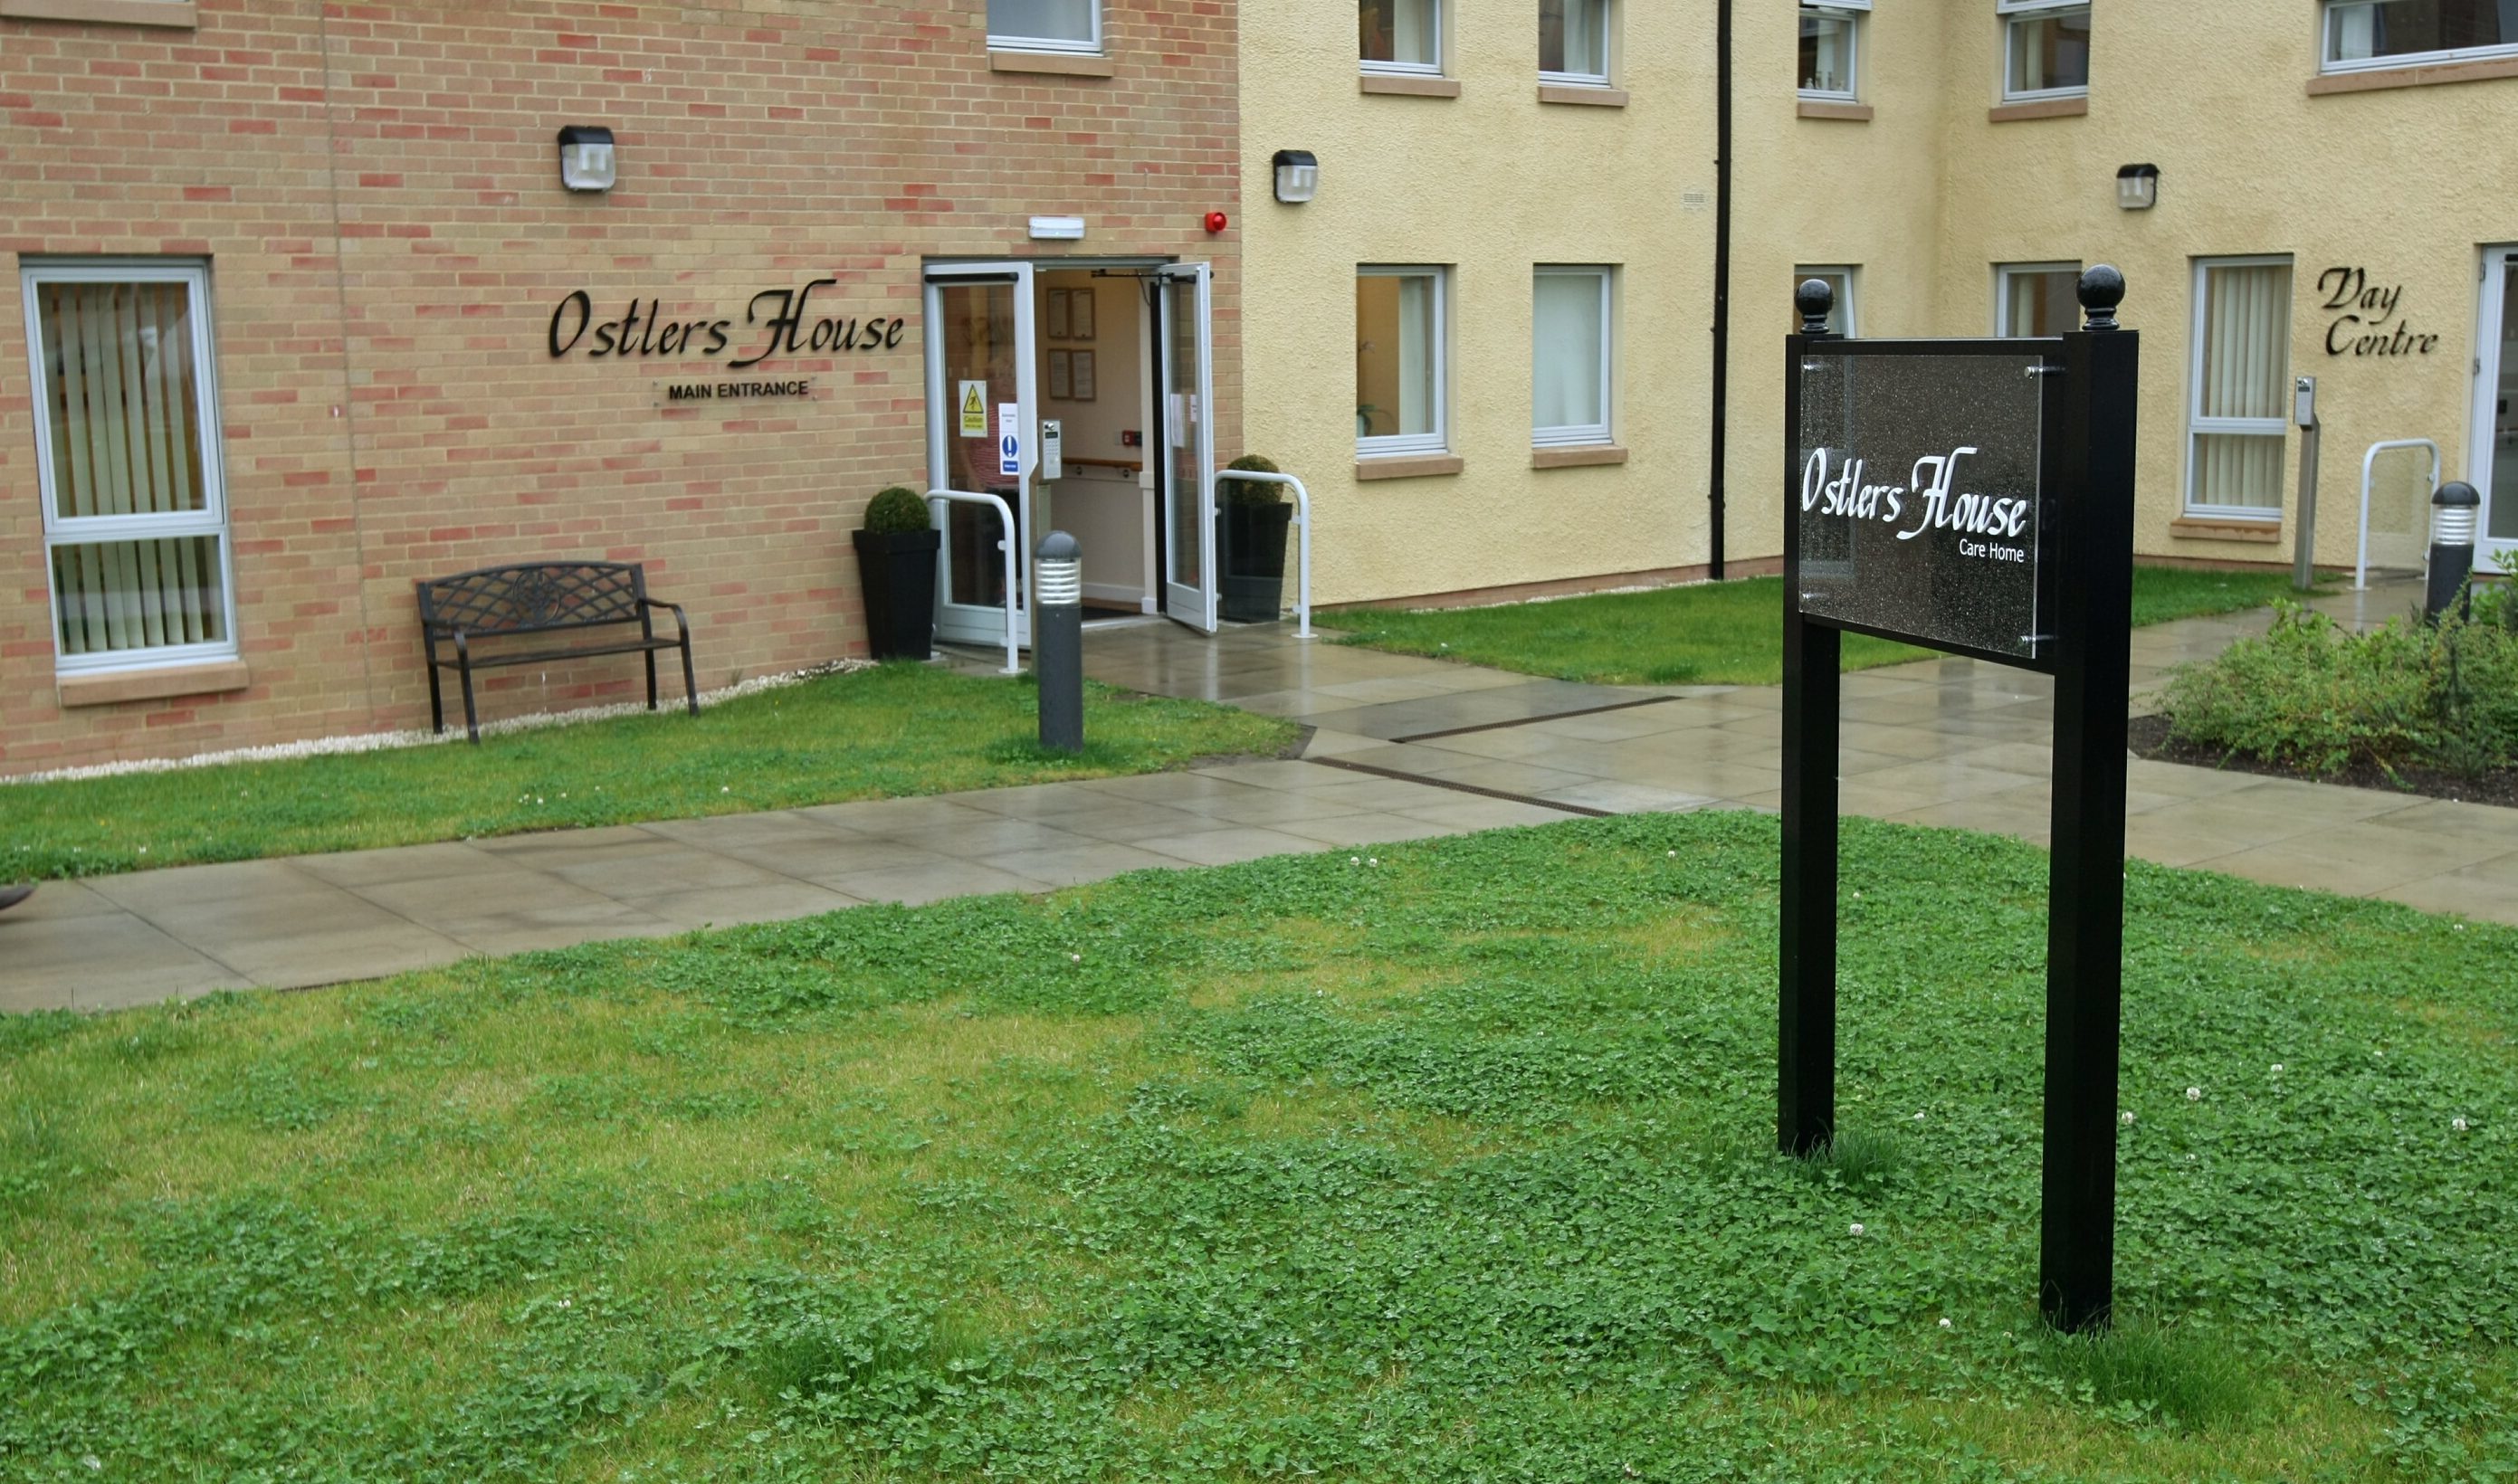 Ostlers House care home in Kirkcaldy.